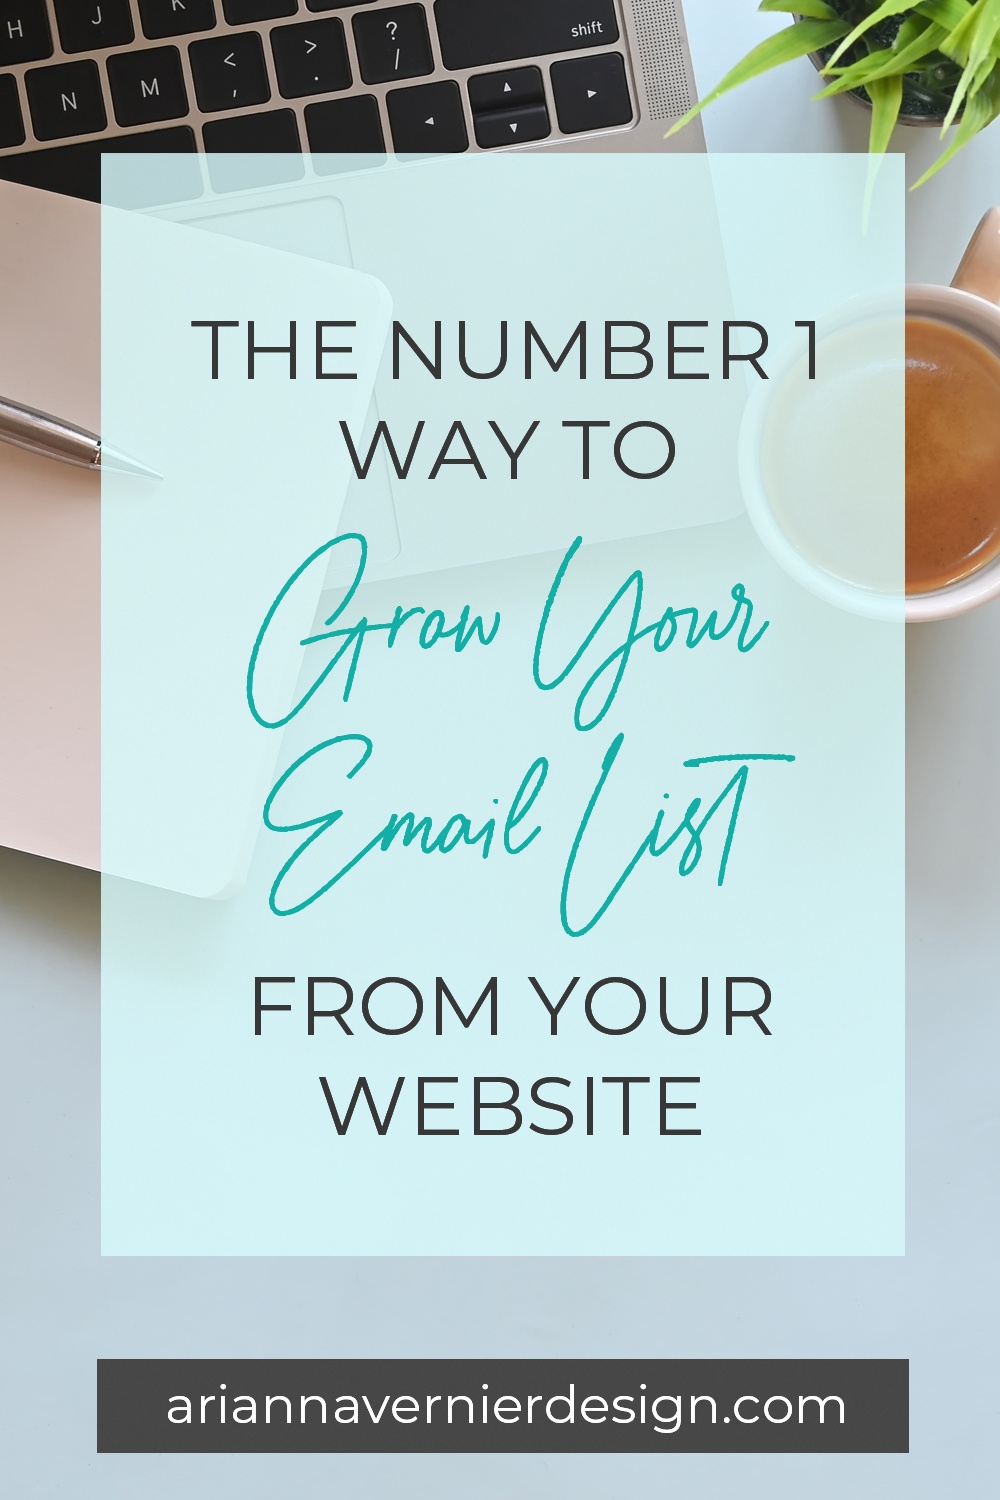 Pinterest pin with a desktop and office supplies in the background, with a light blue rectangle over top, and the title "The Number 1 Way to Grow Your Email List from Your Website."